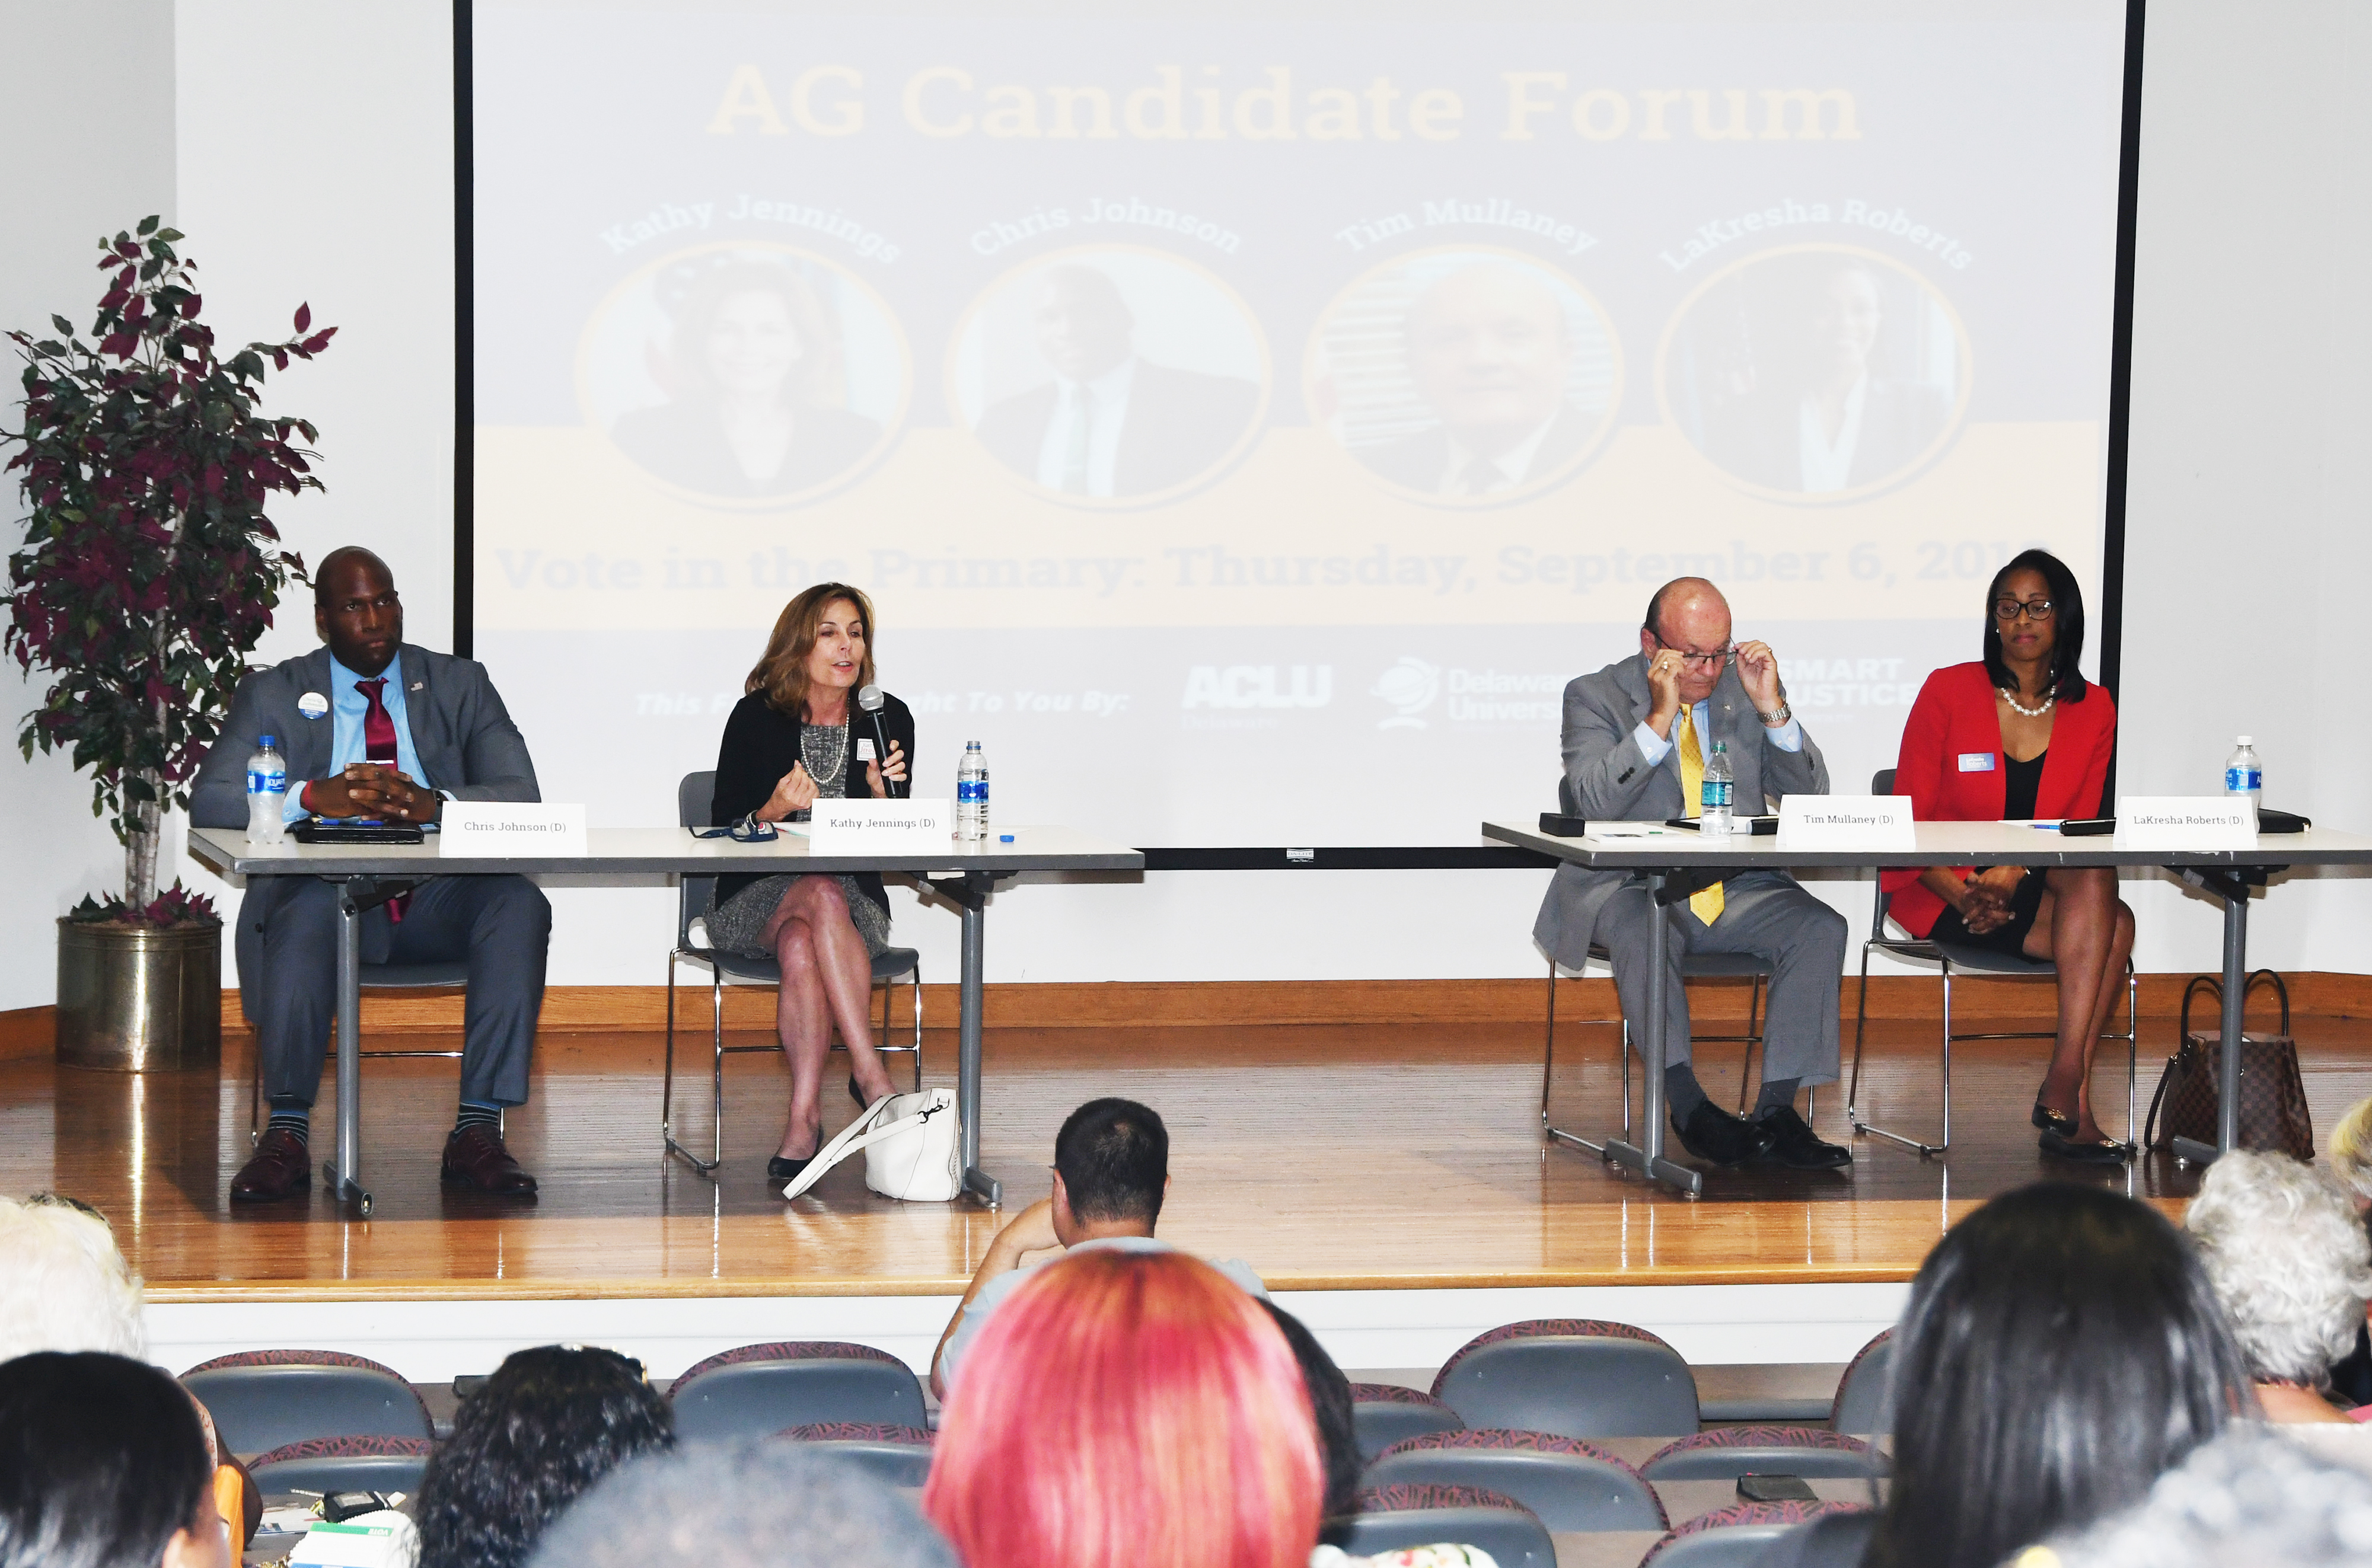 Democratic Attorney General candidates (l-r) Chris Johnson, Kathy Jennings, Tim Mullaney and LaKresha Roberts shared their views on mass incarceration and other criminal justice system issues during the ACLU's AG Forum held at DSU on Aug. 29.